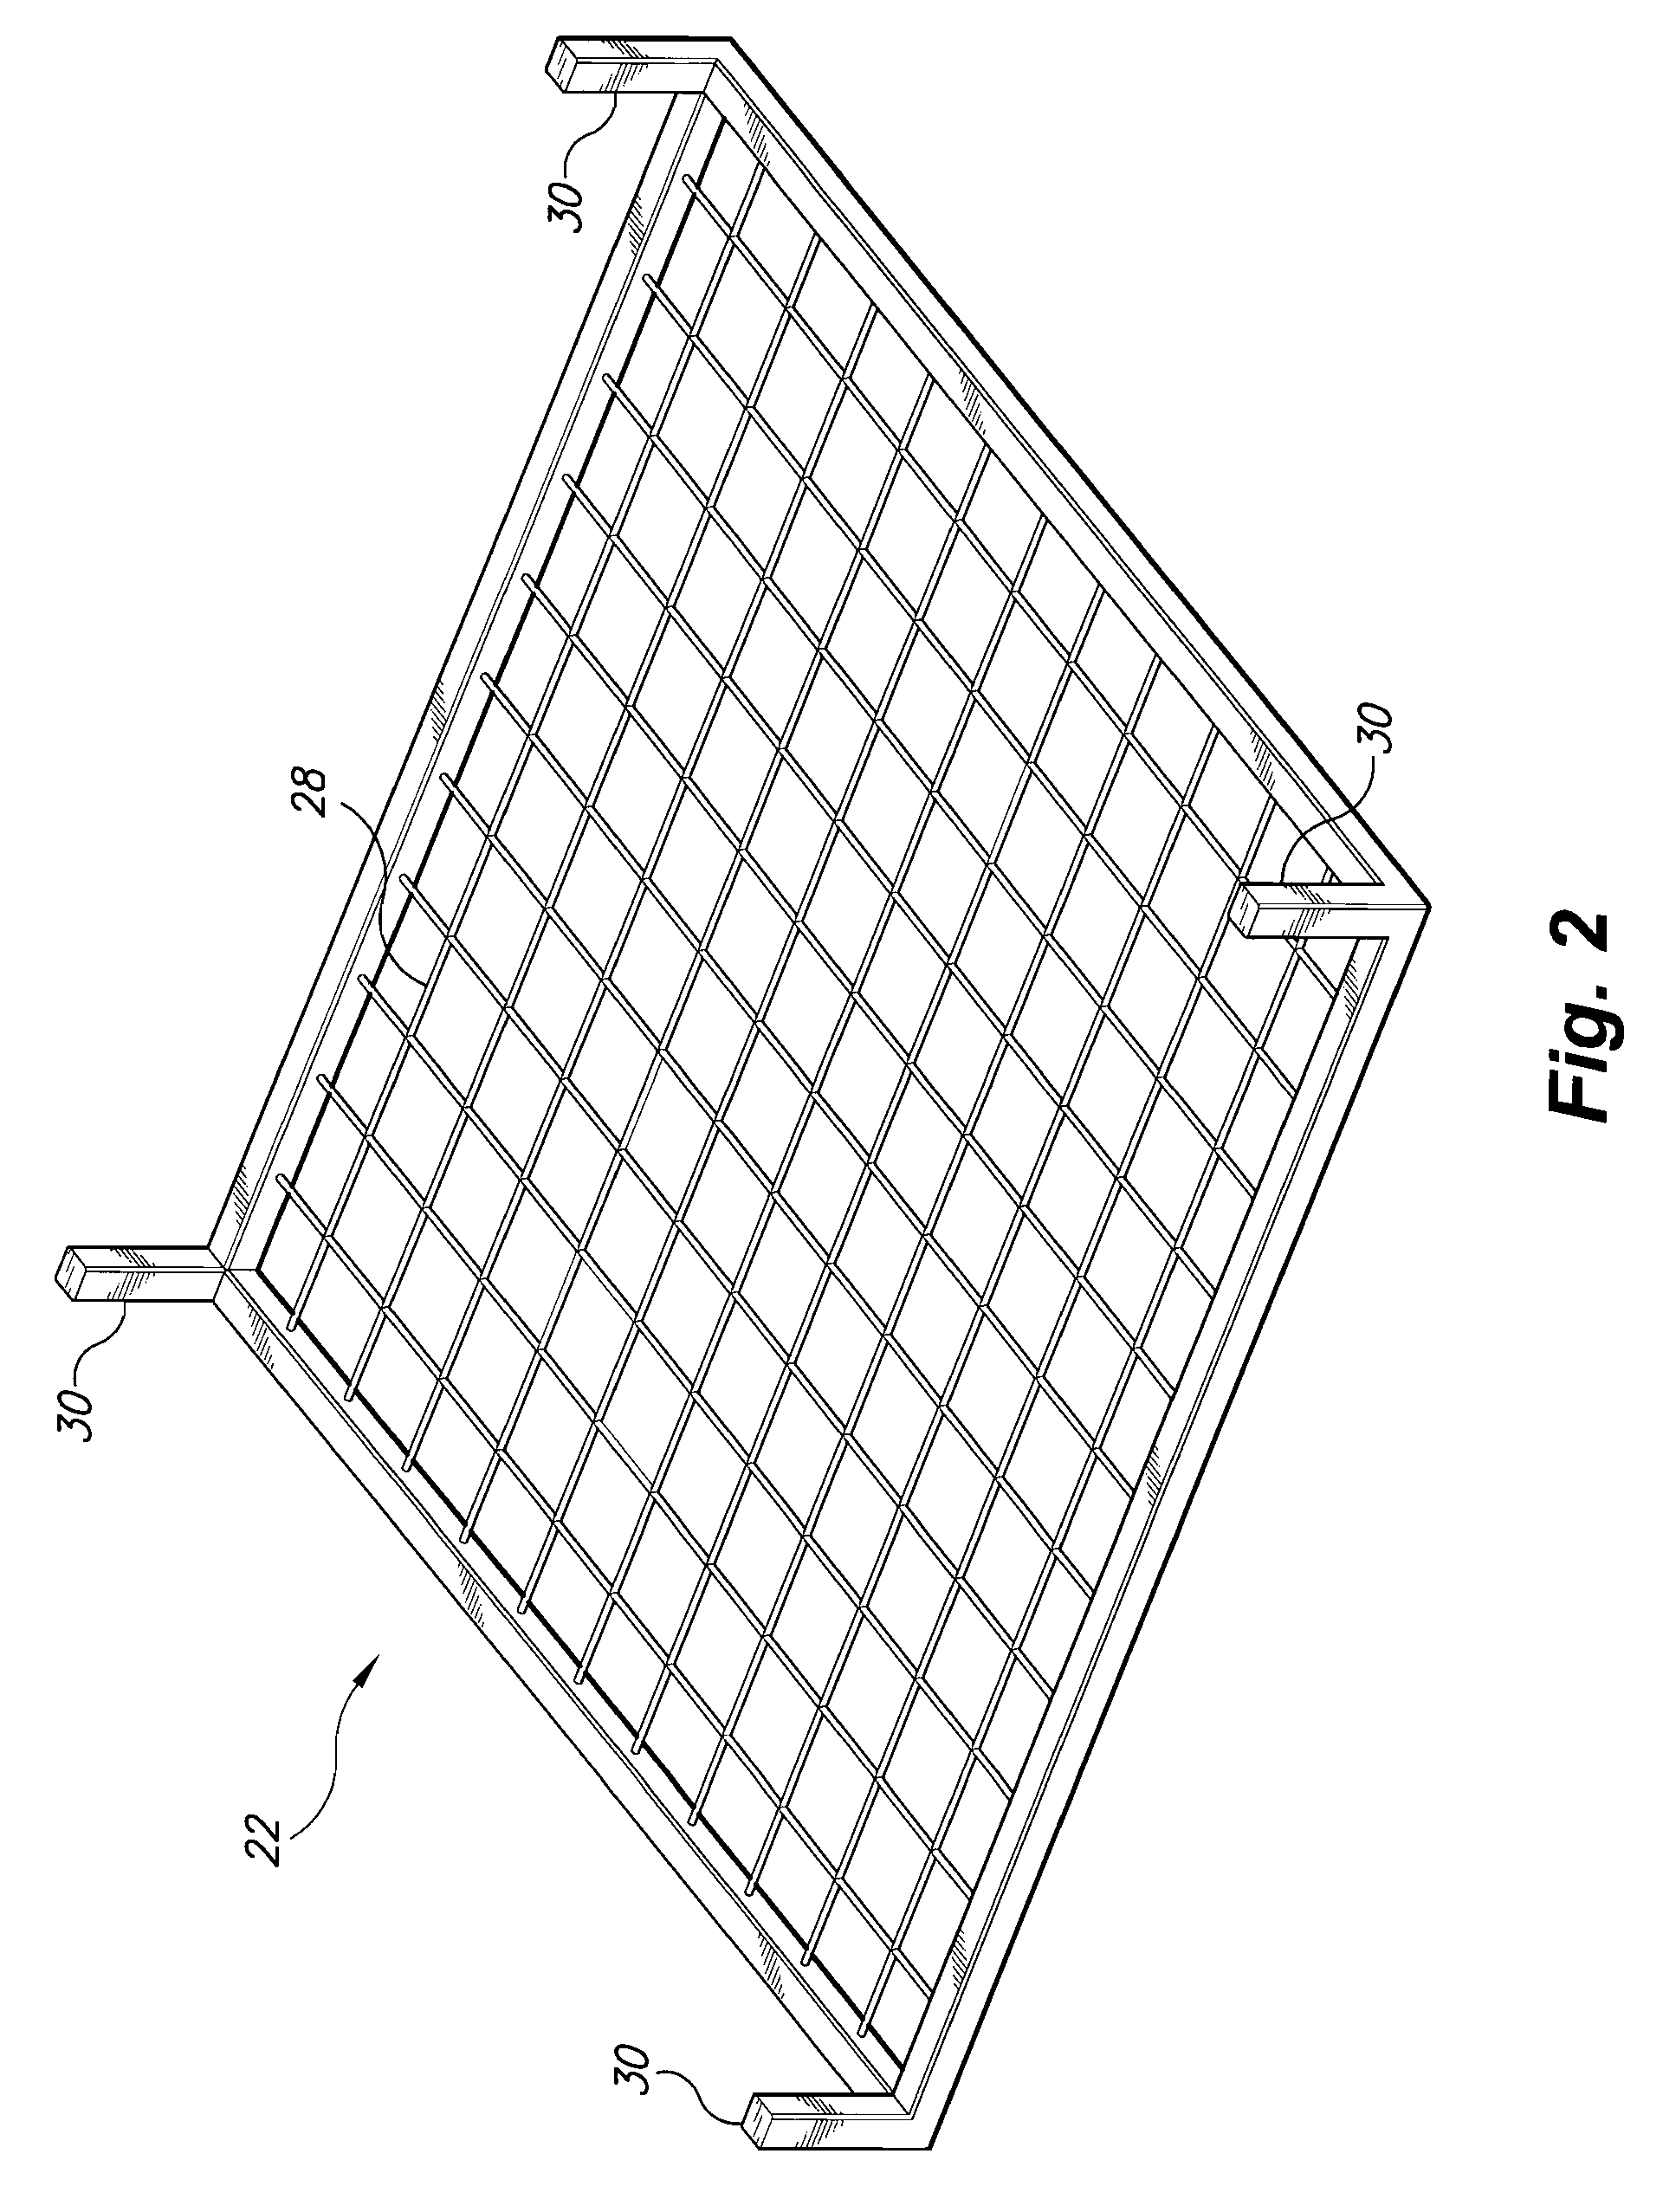 System and method for production of predatory mites